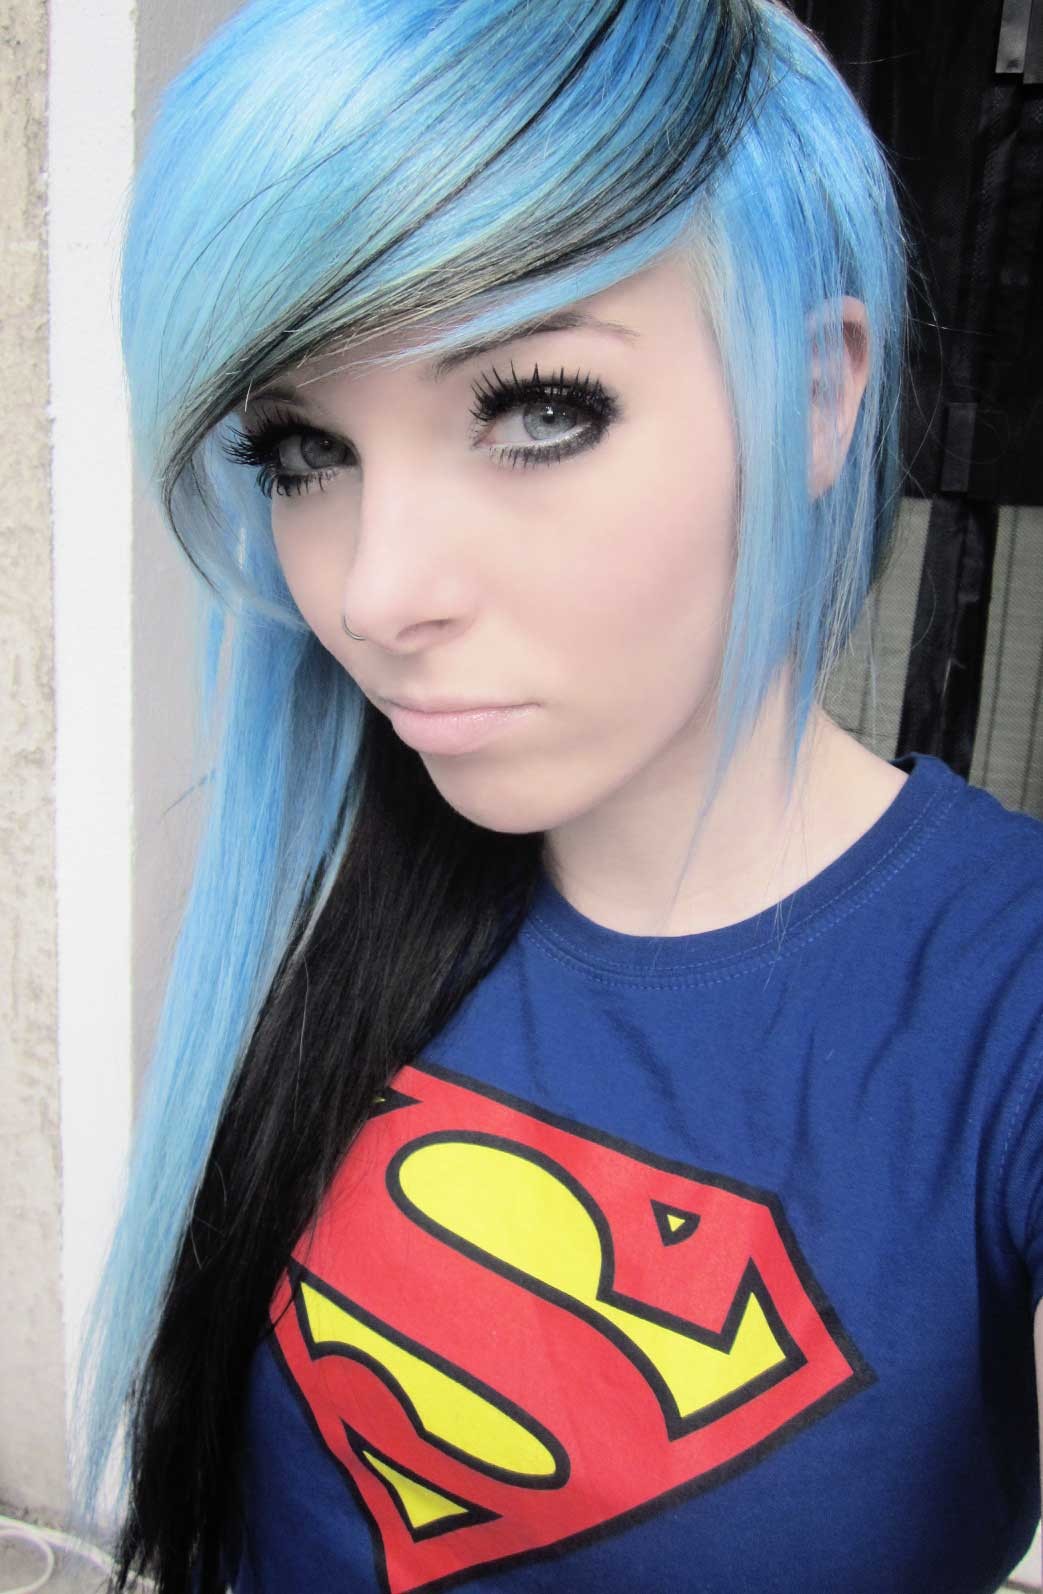 Wallpaper - Cute Emo Hairstyles For Girls - 1043x1594 Wallpaper 